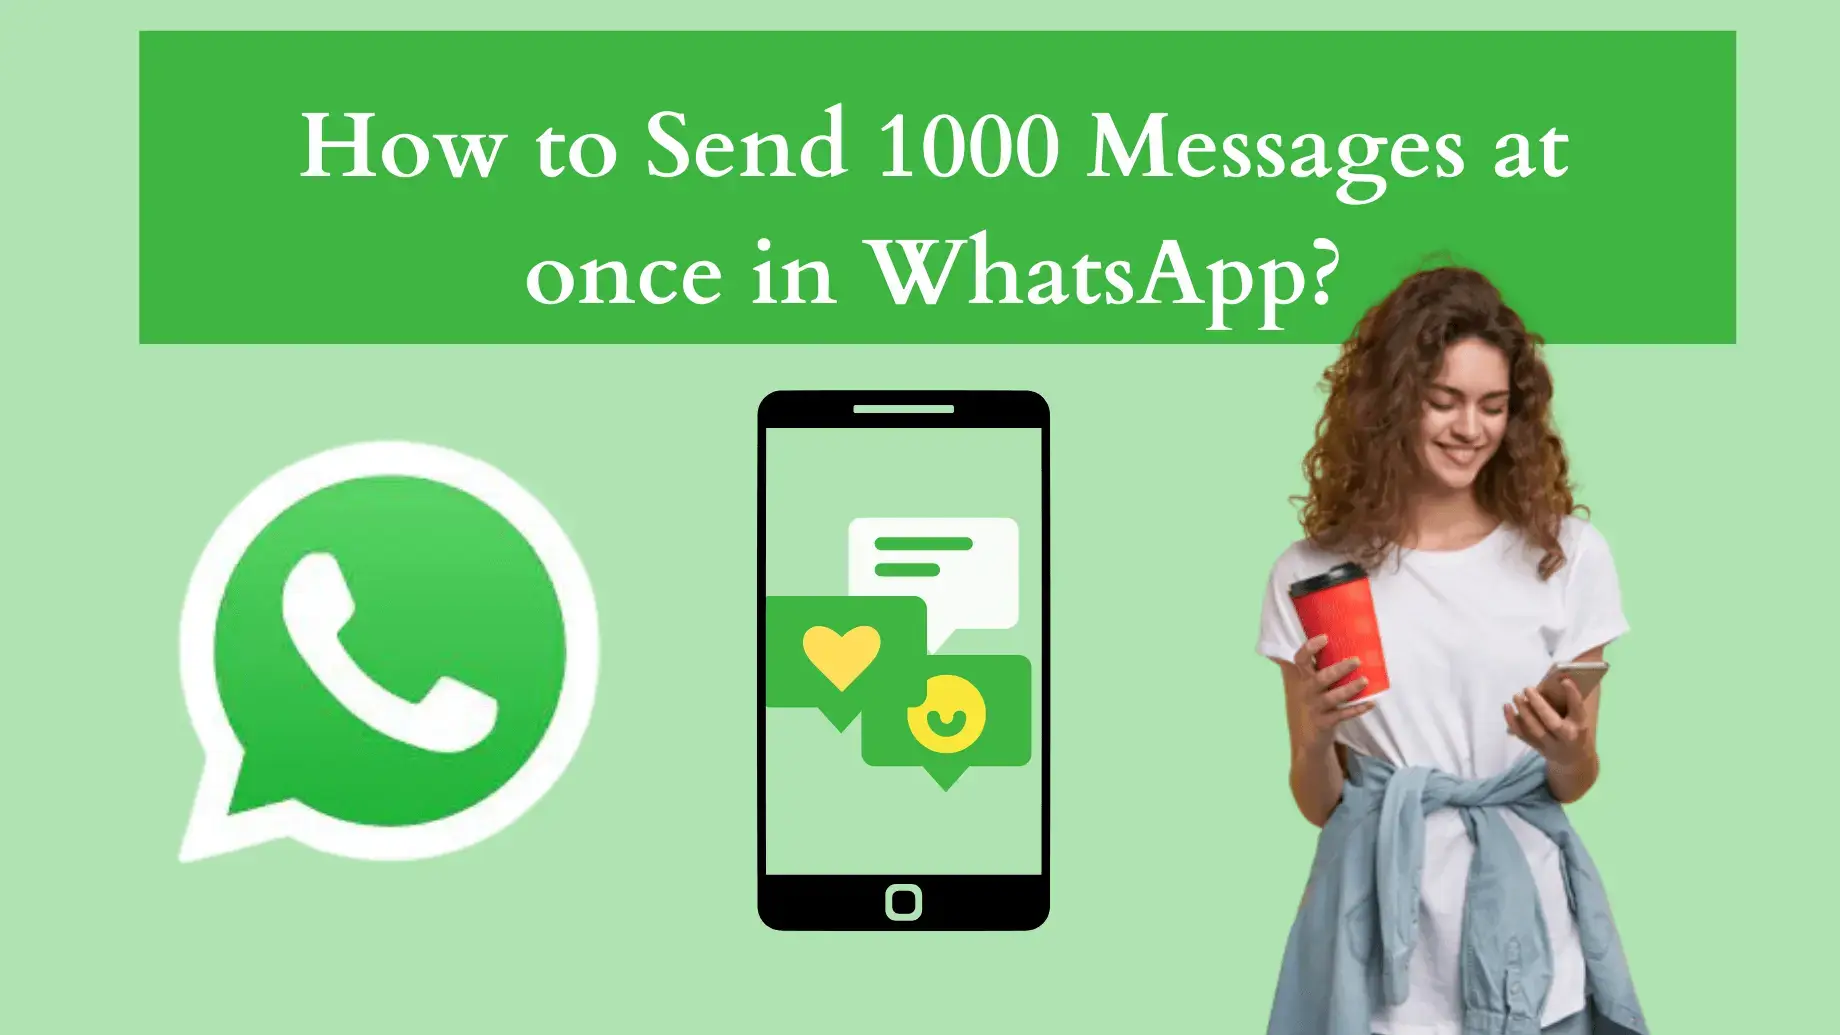 How to Send 1000 Messages at once in WhatsApp